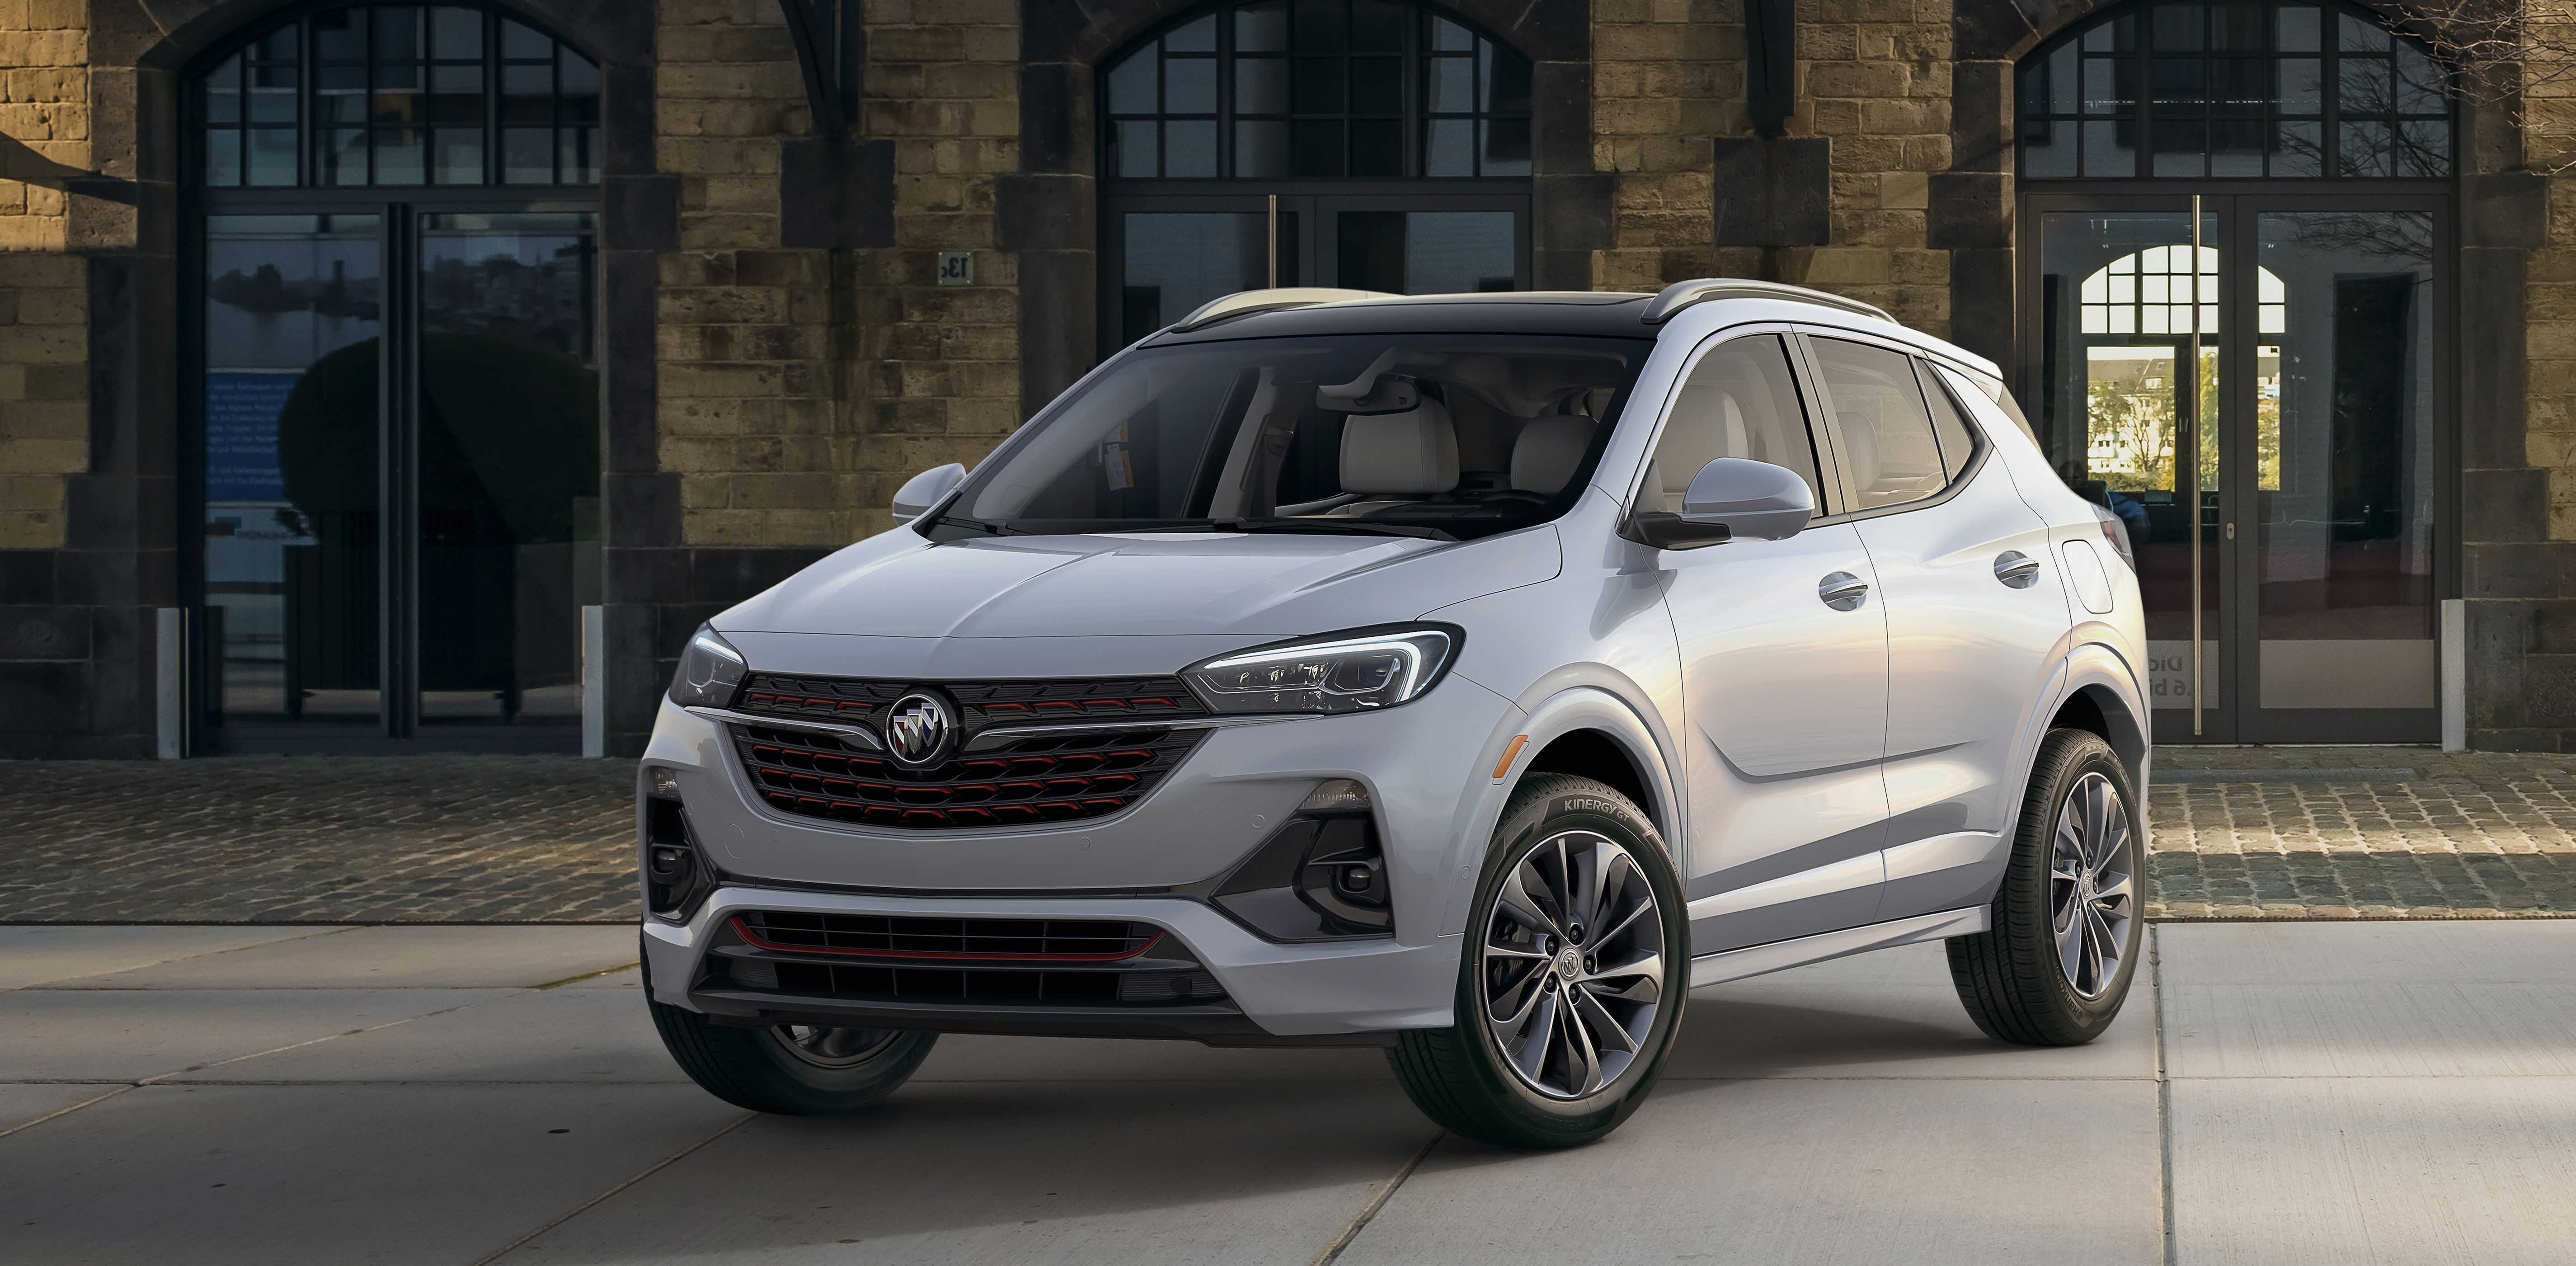 2020 Buick Encore Gx What We Know So Far